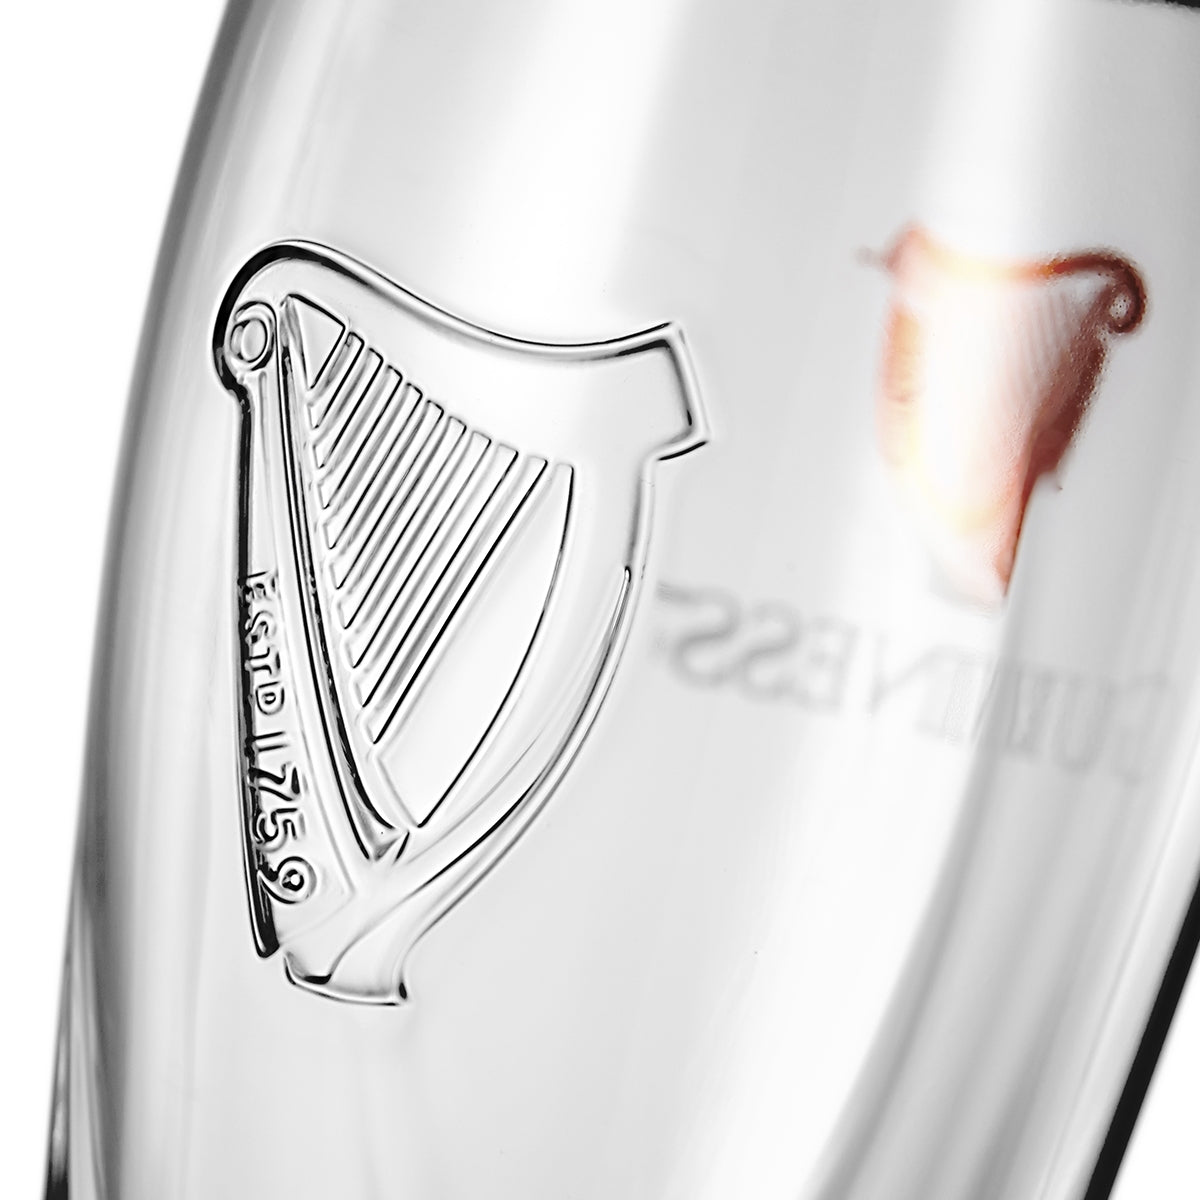 A Guinness Pint Glass 12 Pack featuring an embossed harp design.